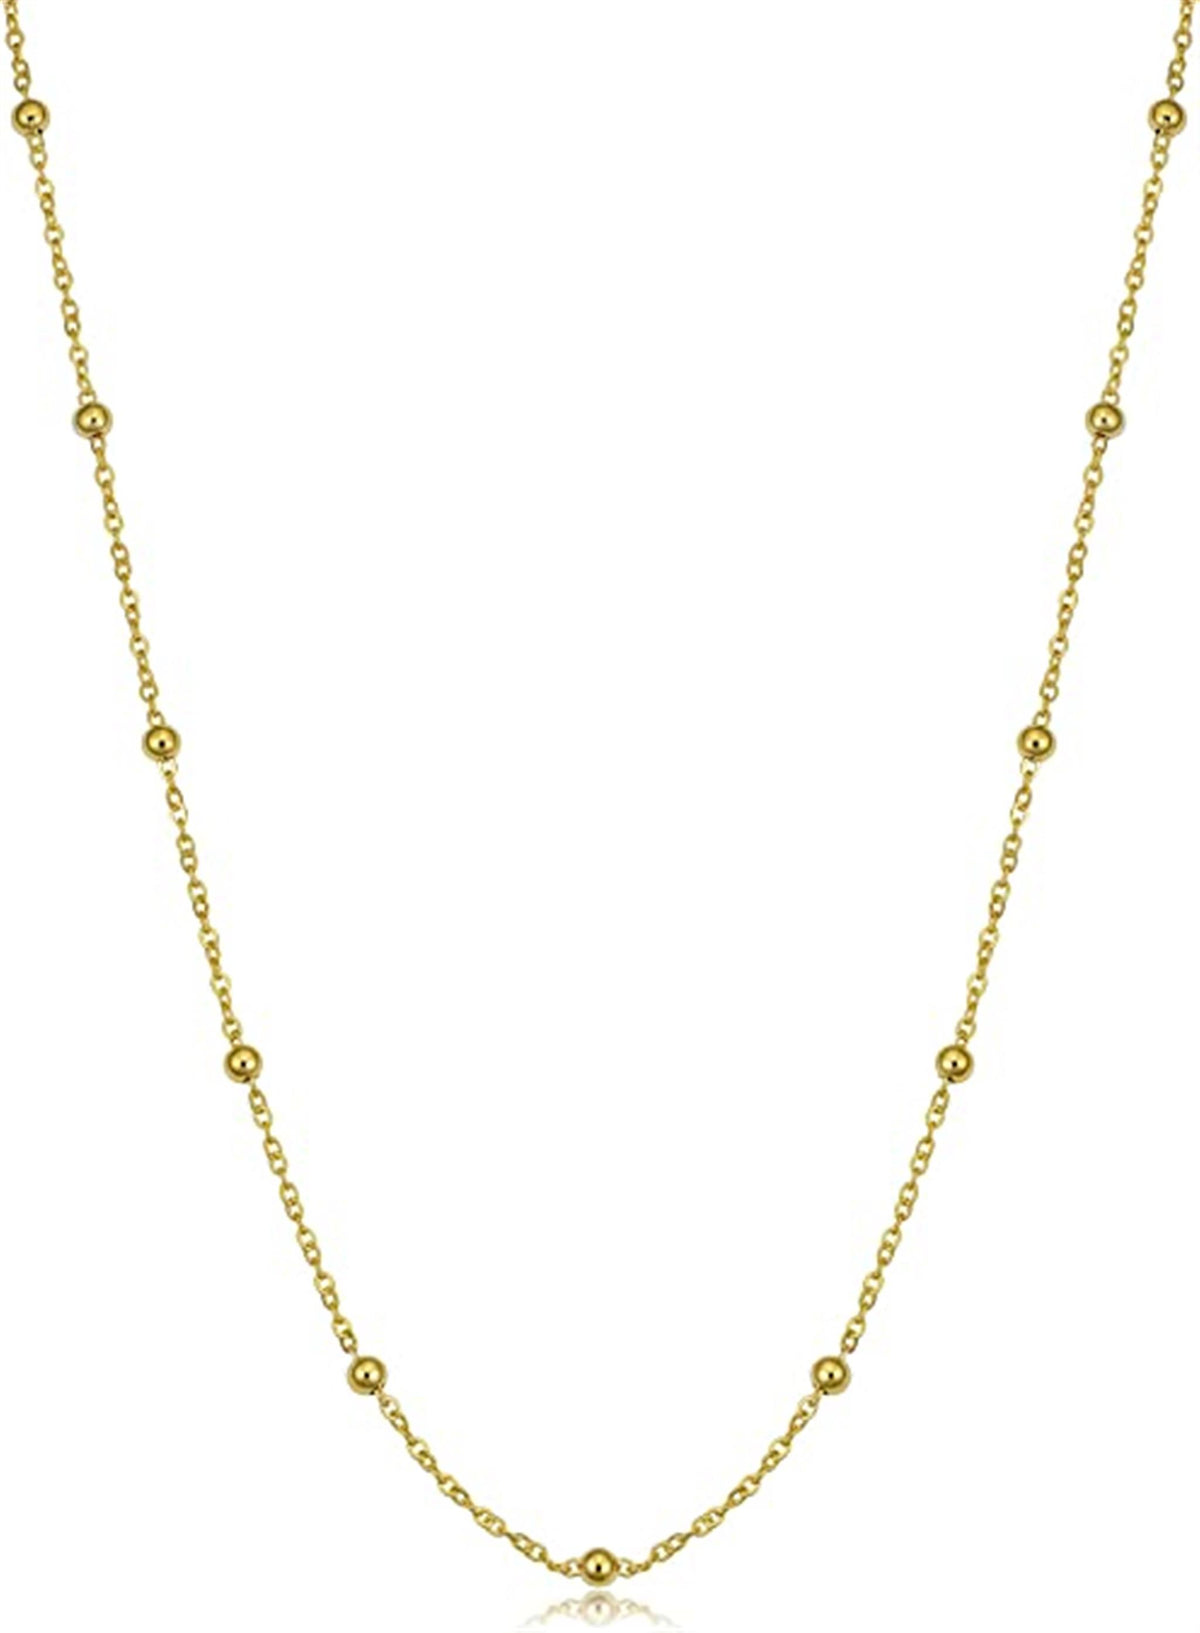 16" 14K Yellow Gold Flat Cable Saturn Necklace